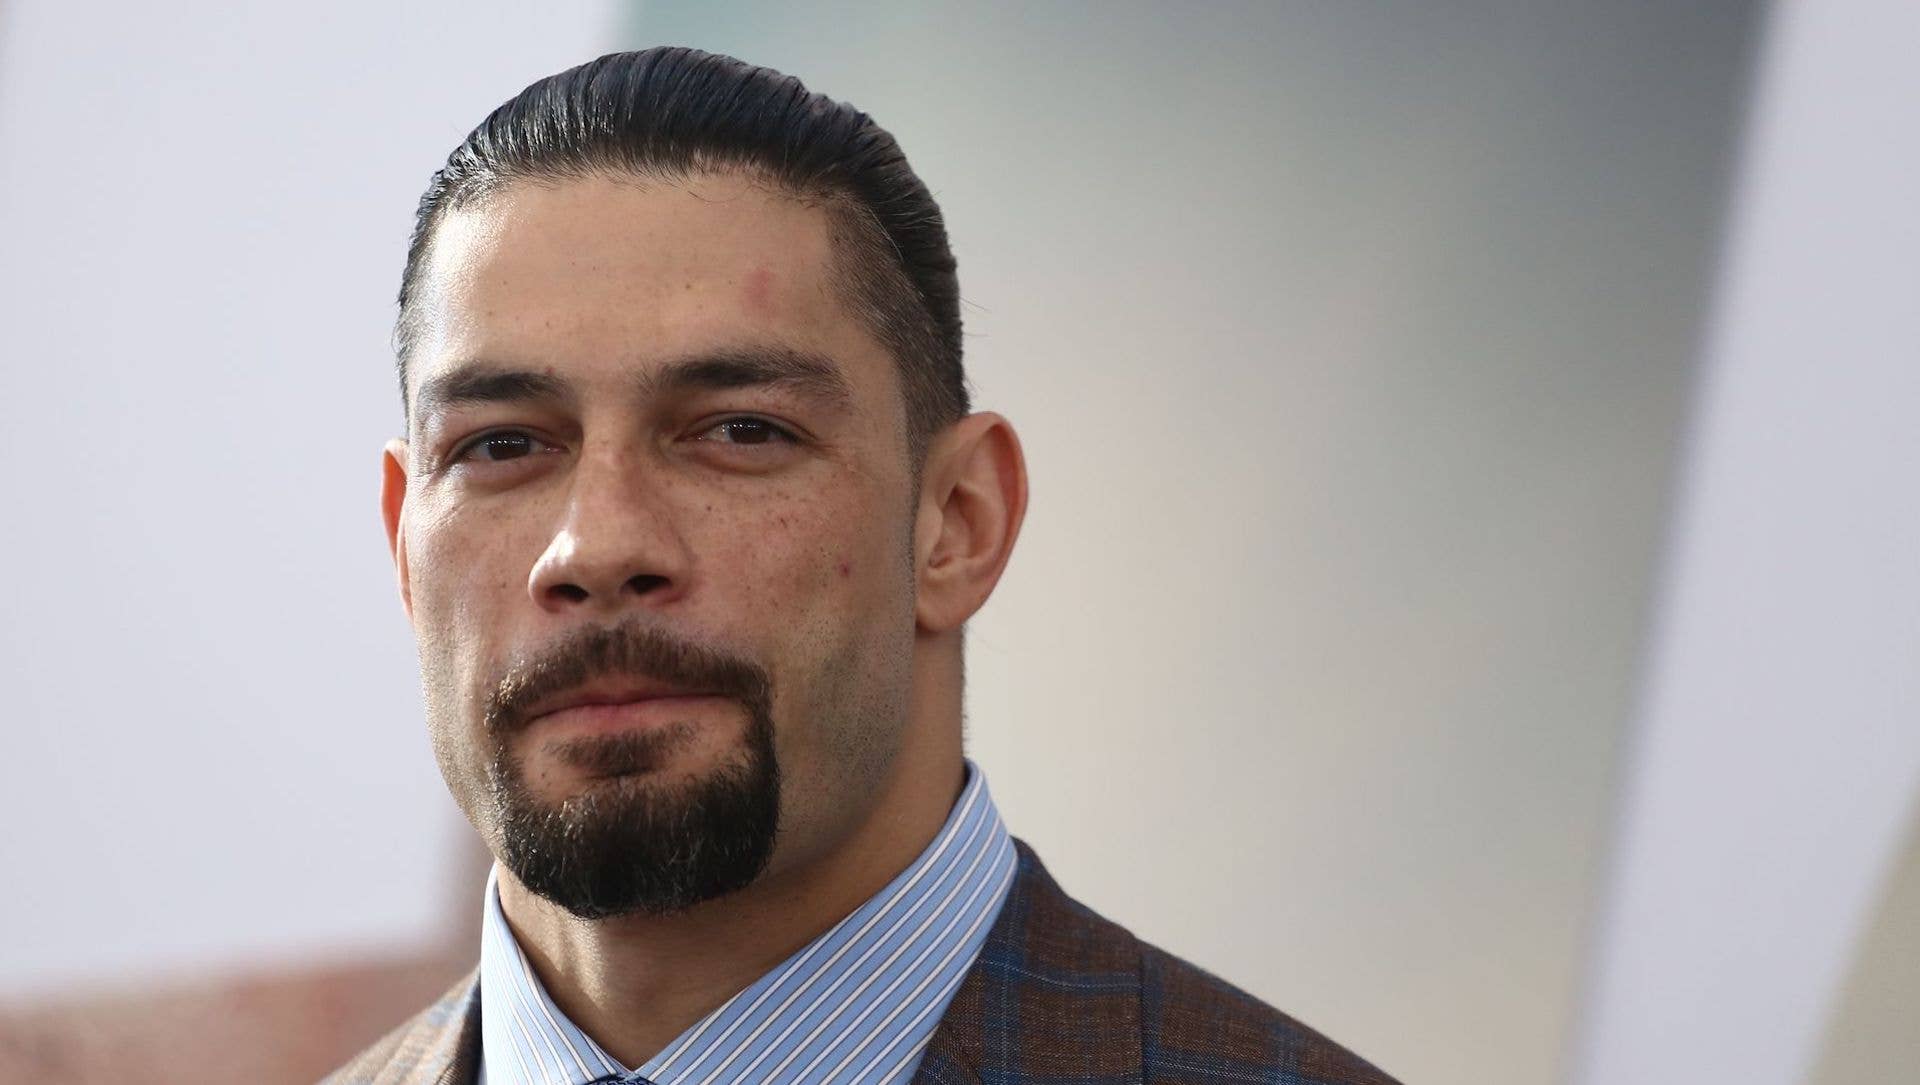 Roman Reigns attends the Premiere Of Universal Pictures' "Fast & Furious Presents: Hobbs & Shaw" at Dolby Theatre on July 13, 2019